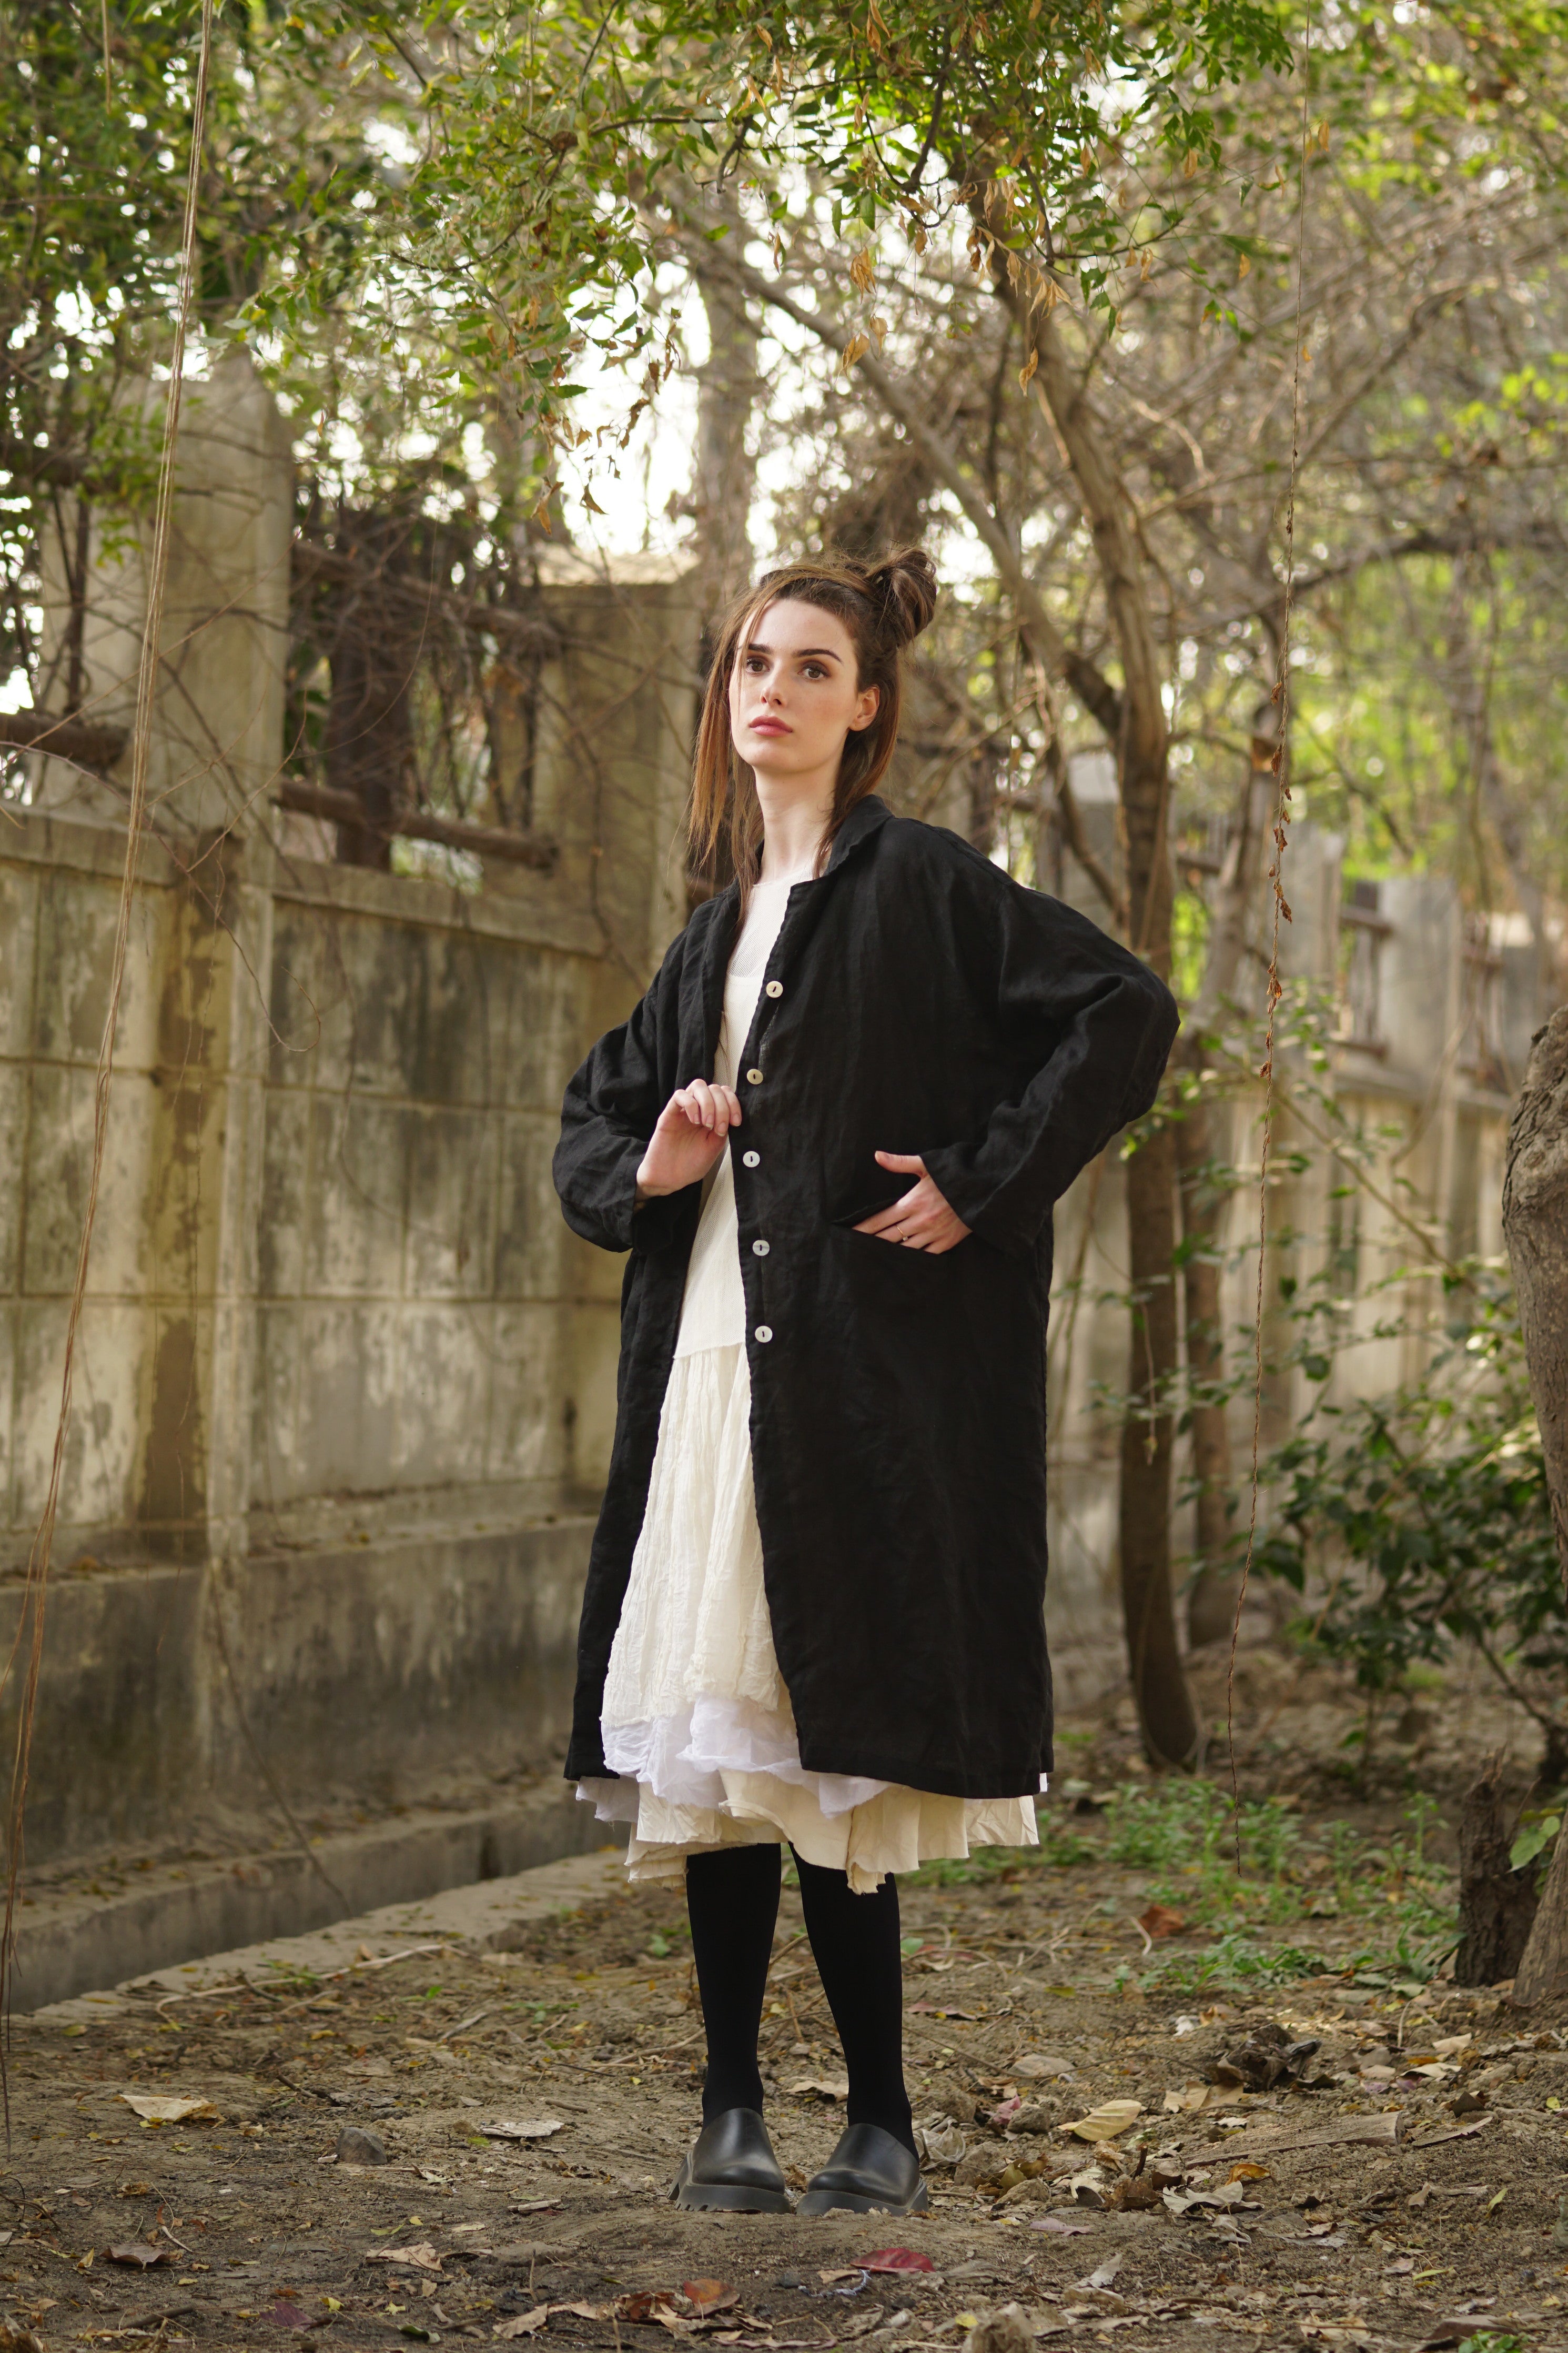 A MegbyDesign model is wearing a black linen coat with agoya shell buttons